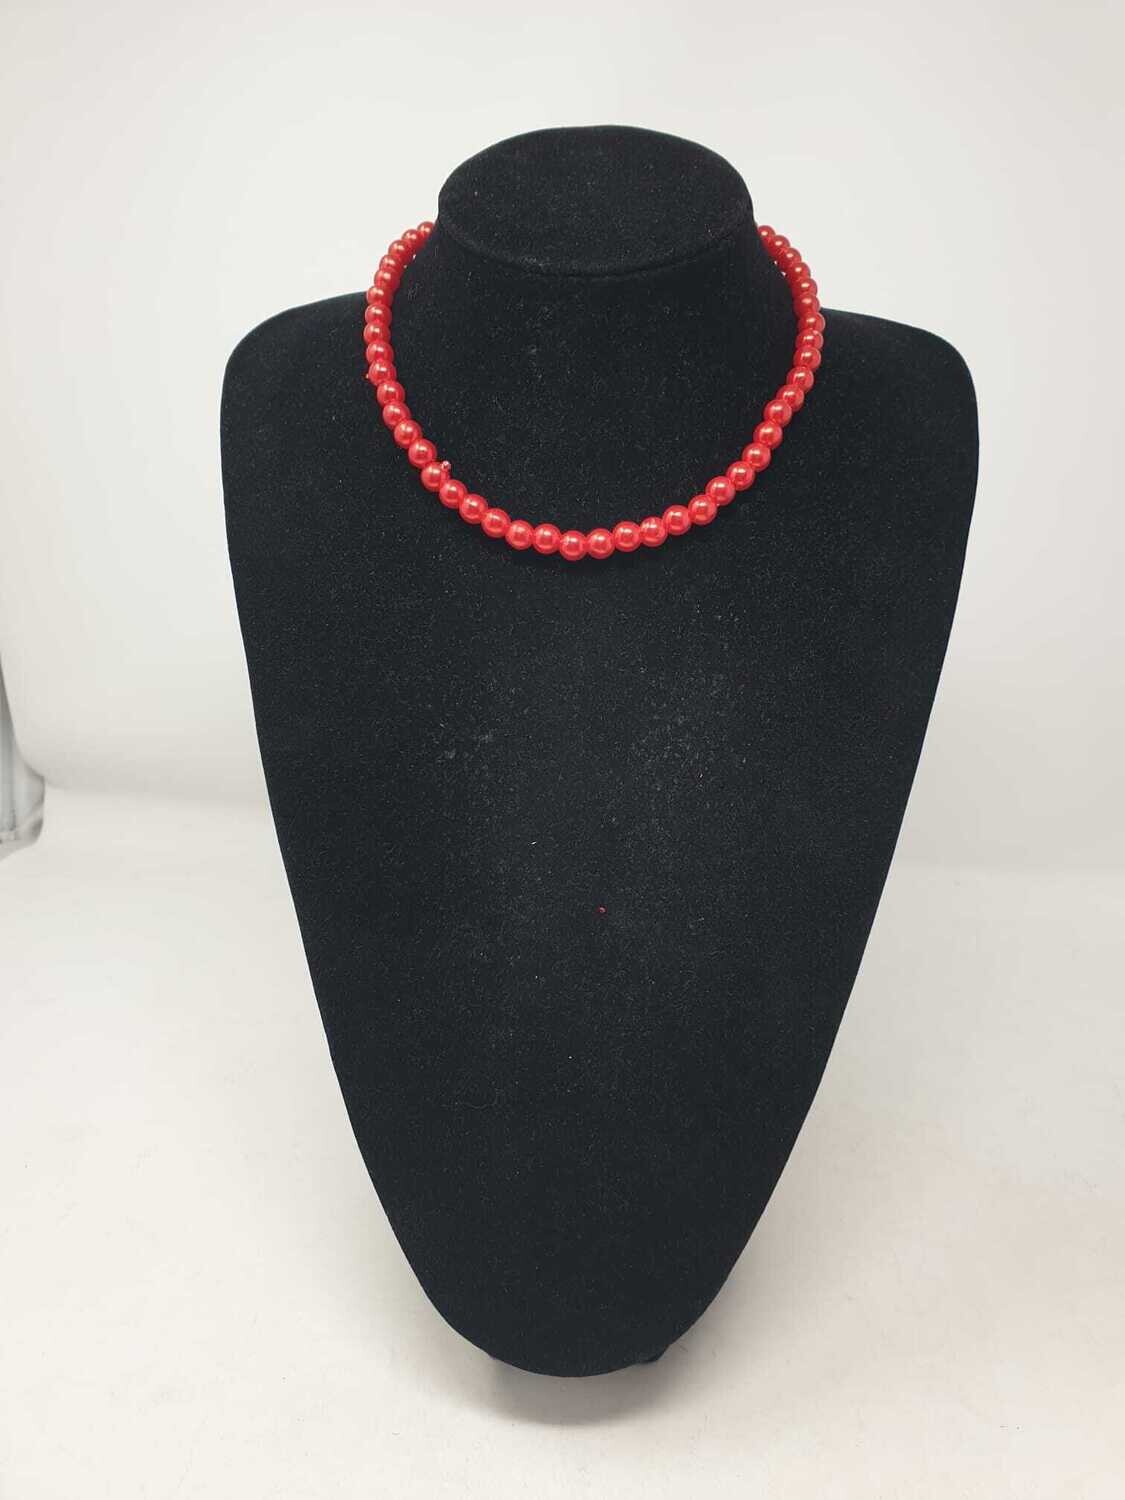 Handmade Beaded Necklace - Red